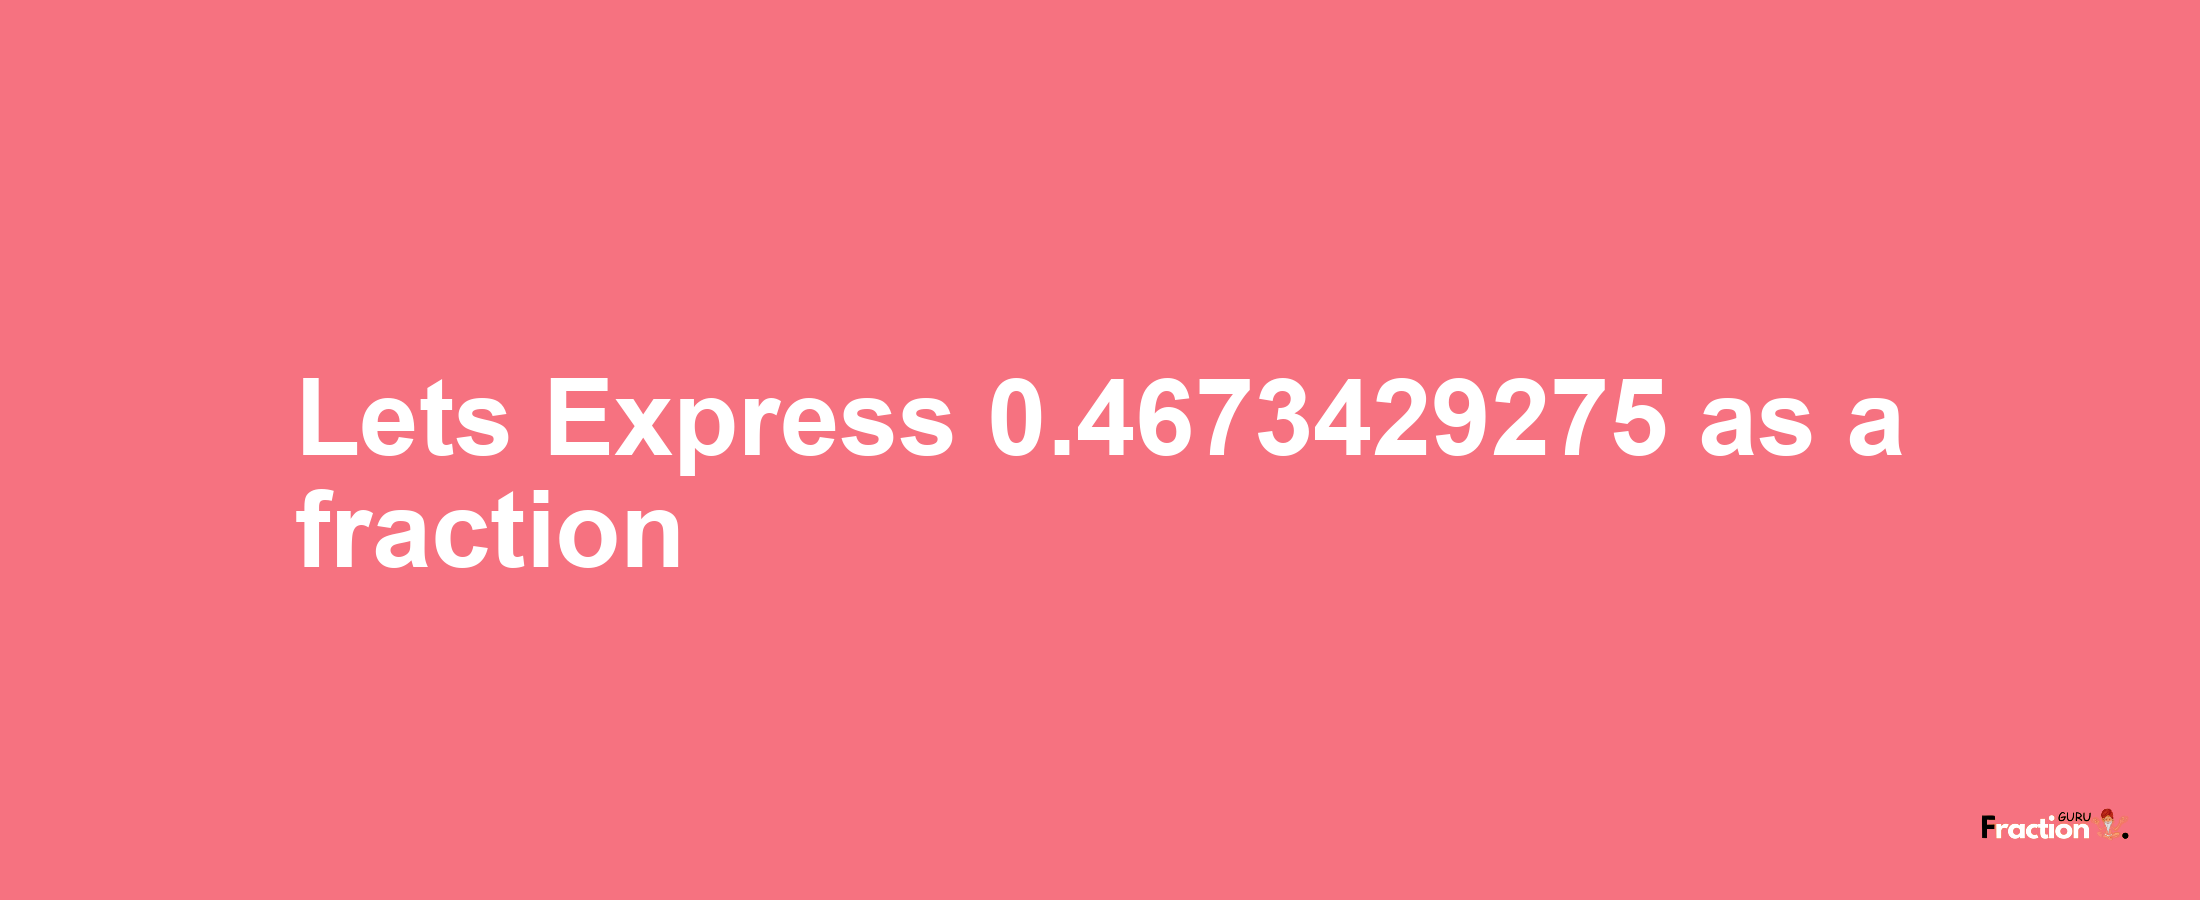 Lets Express 0.4673429275 as afraction